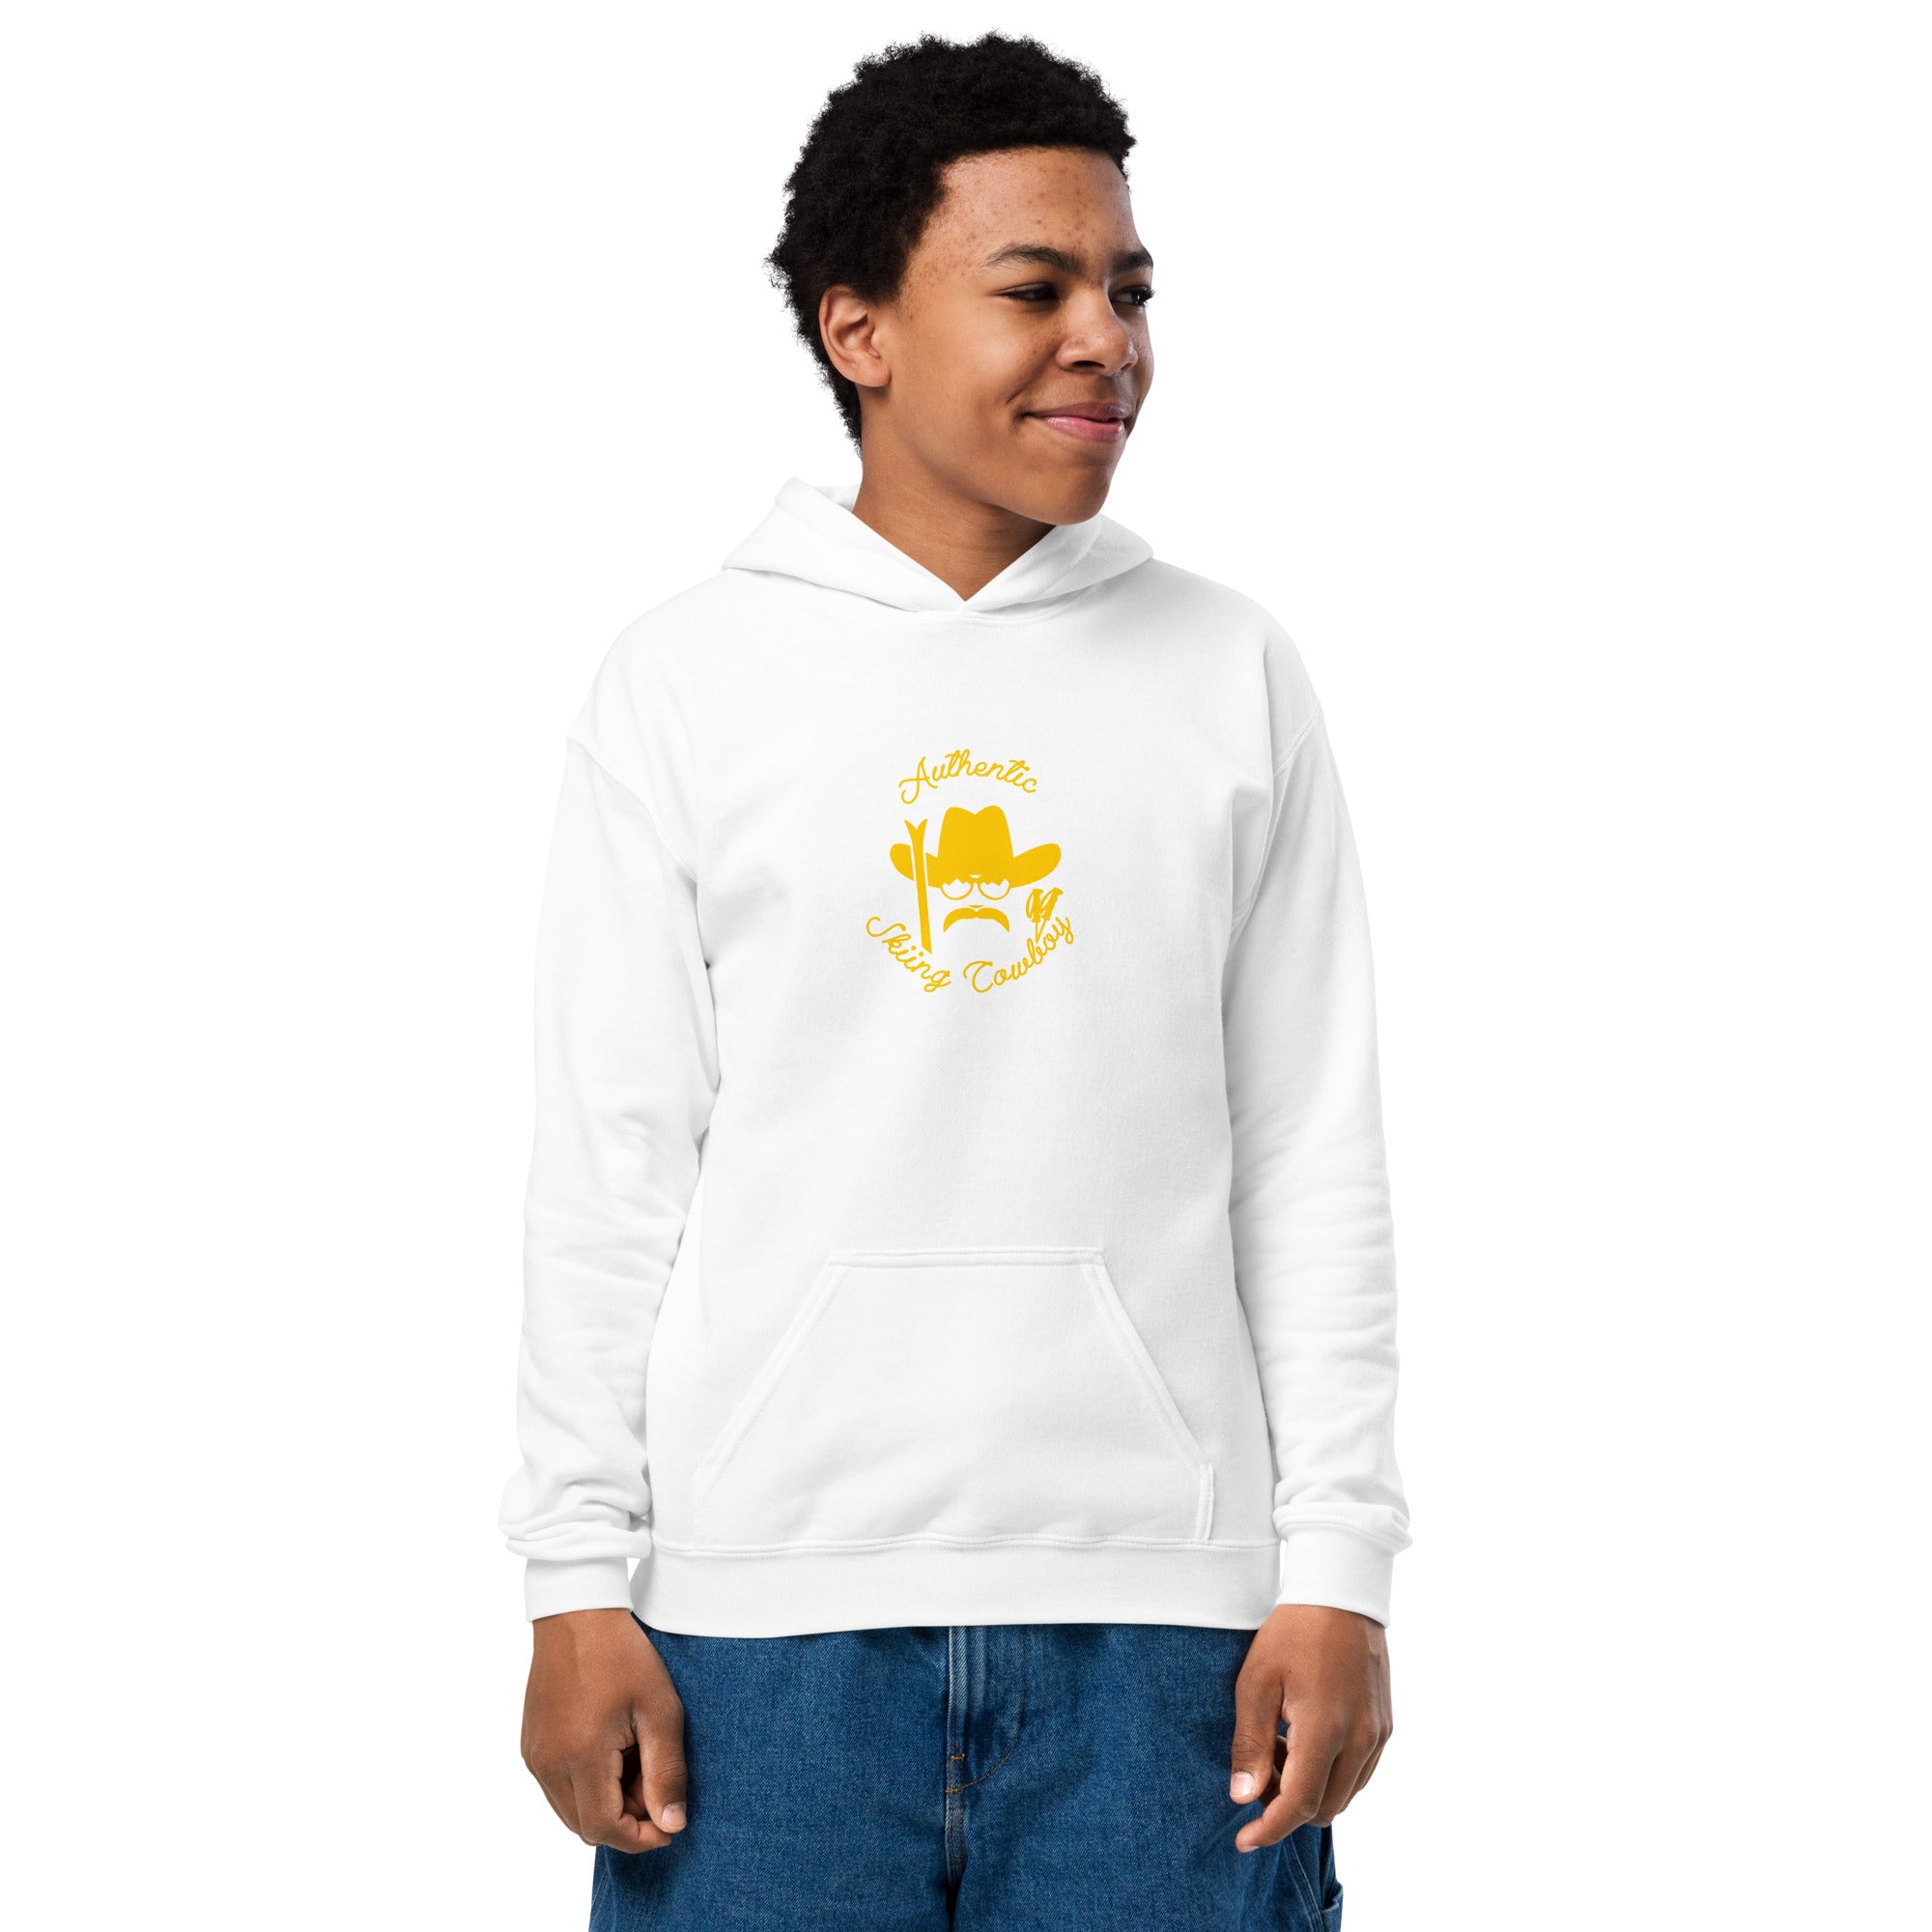 Youth heavy blend hoodie Authentic Skiing Cowboy